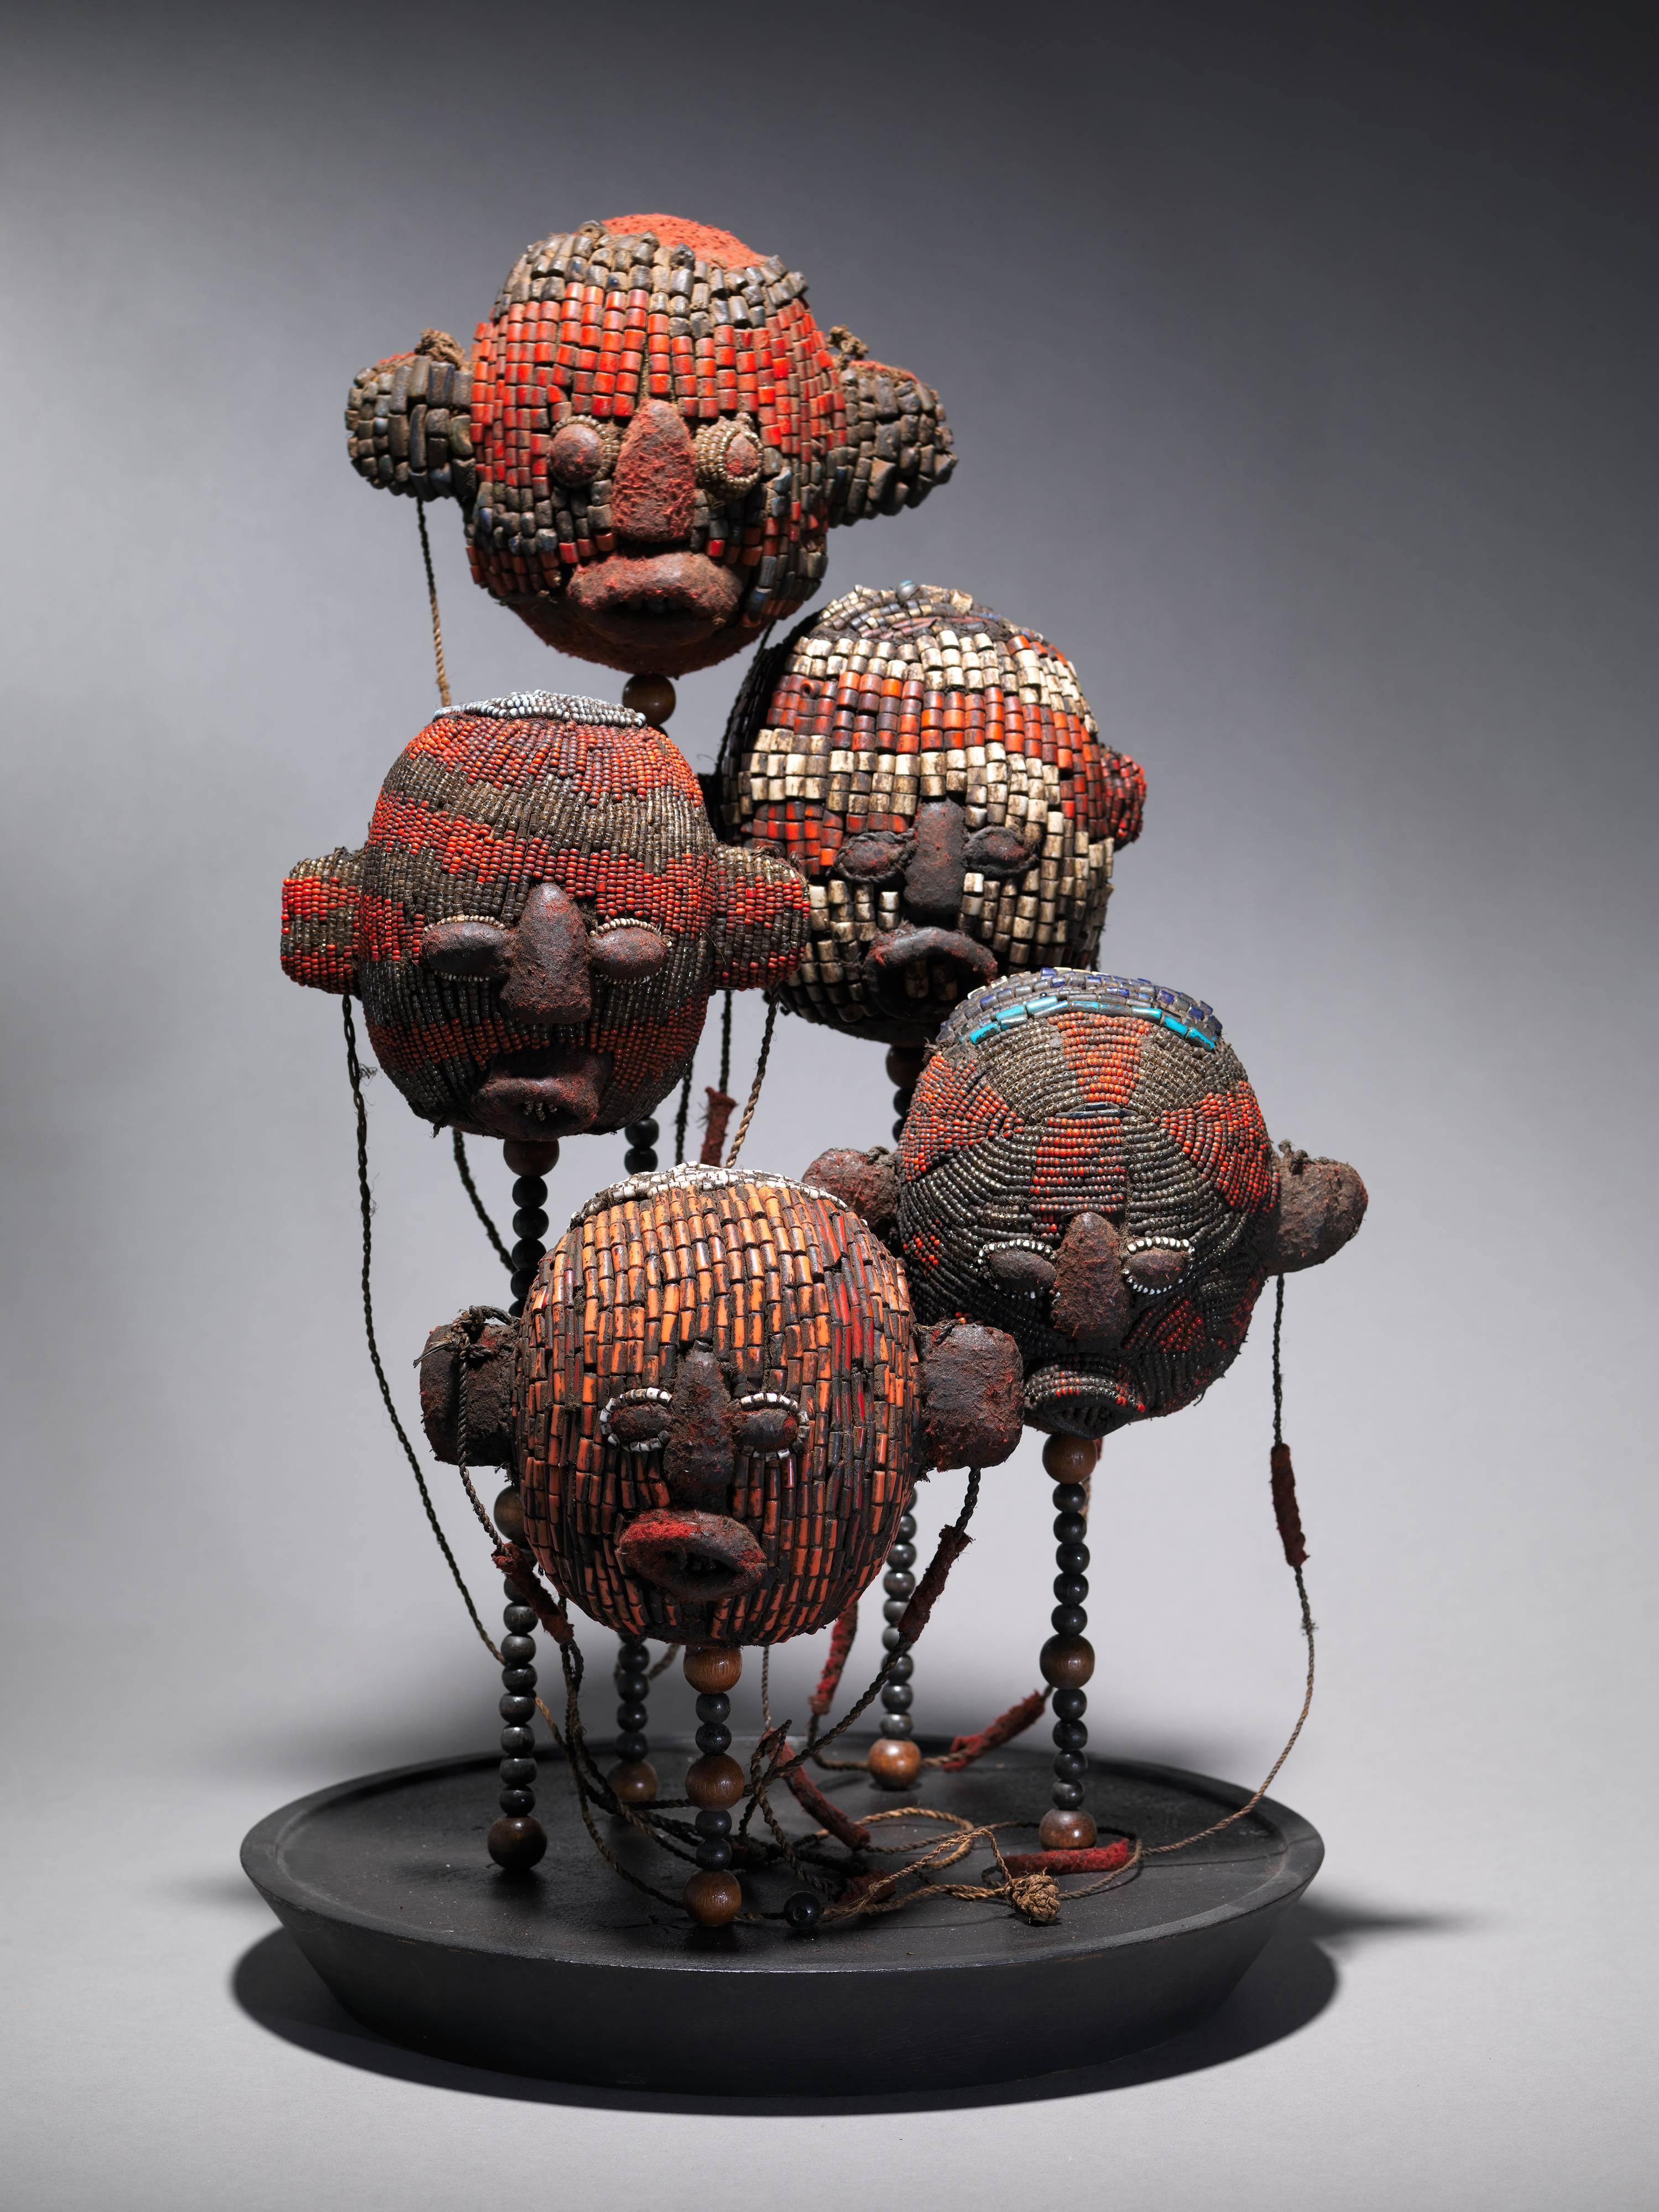 20th Century Two Handblown Glass Domes with Fine Beaded Regalia, Cameroon Grasslands